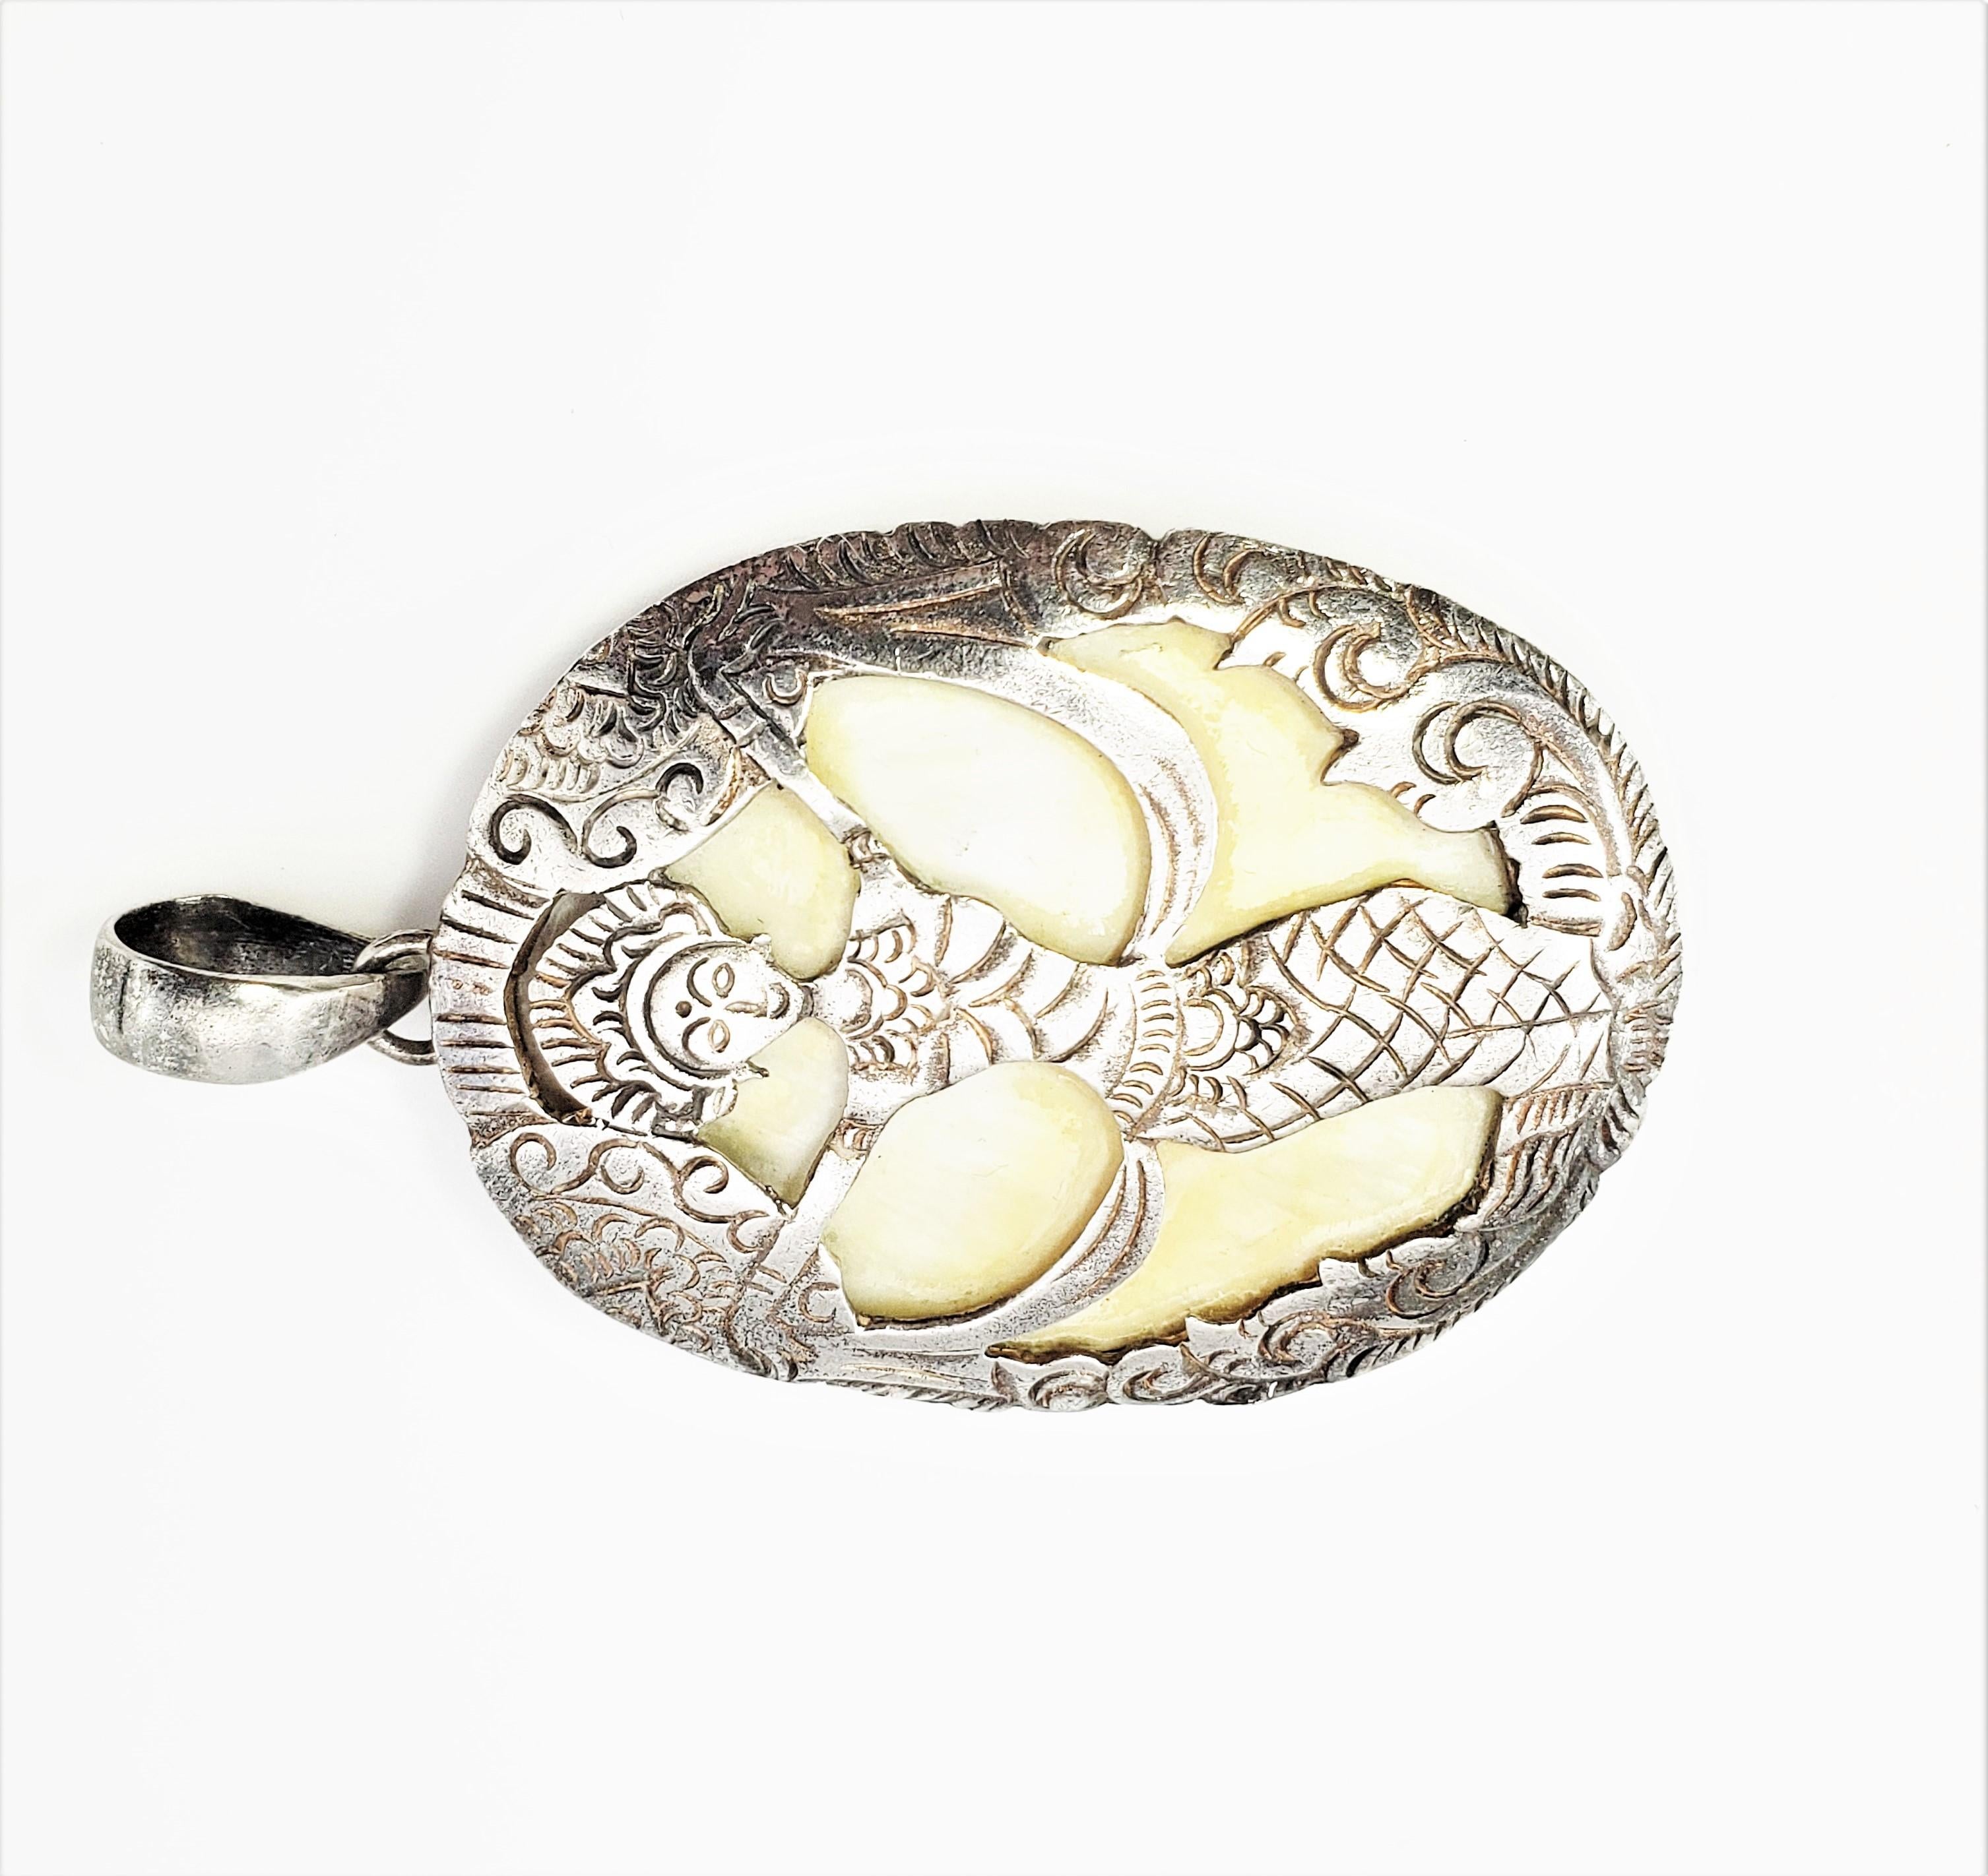 Vintage Siam Sterling Silver Overlay Shell Dancing Goddess Pendant-

This lovely dancing goddess pendant is crafted in beautifully detailed sterling silver and shell.

Size: 2 1/4